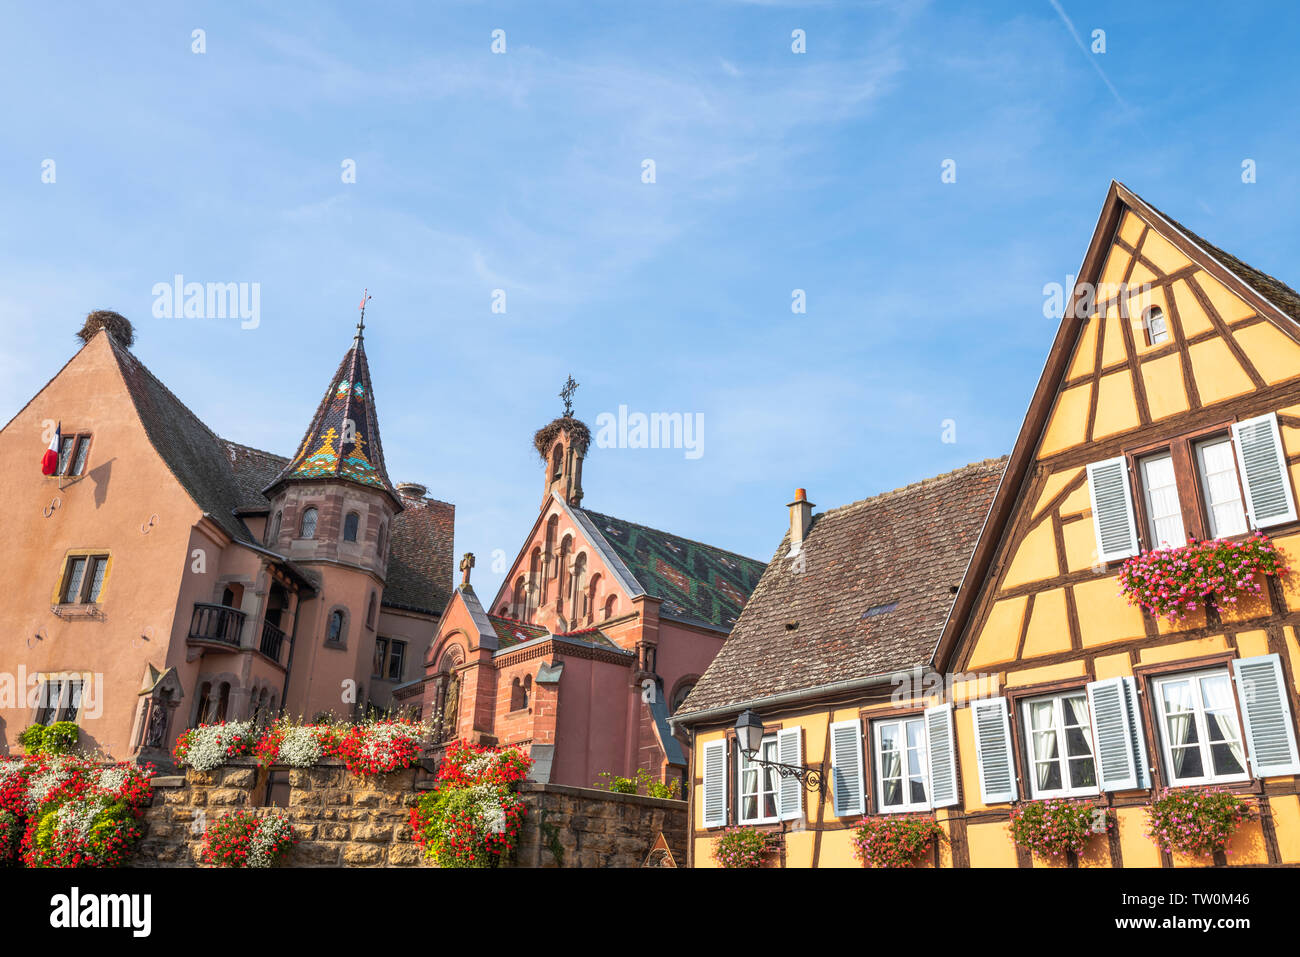 old village Eguisheim, castle and half-timbered houses, old town and tourist destination of Alsace, France Stock Photo